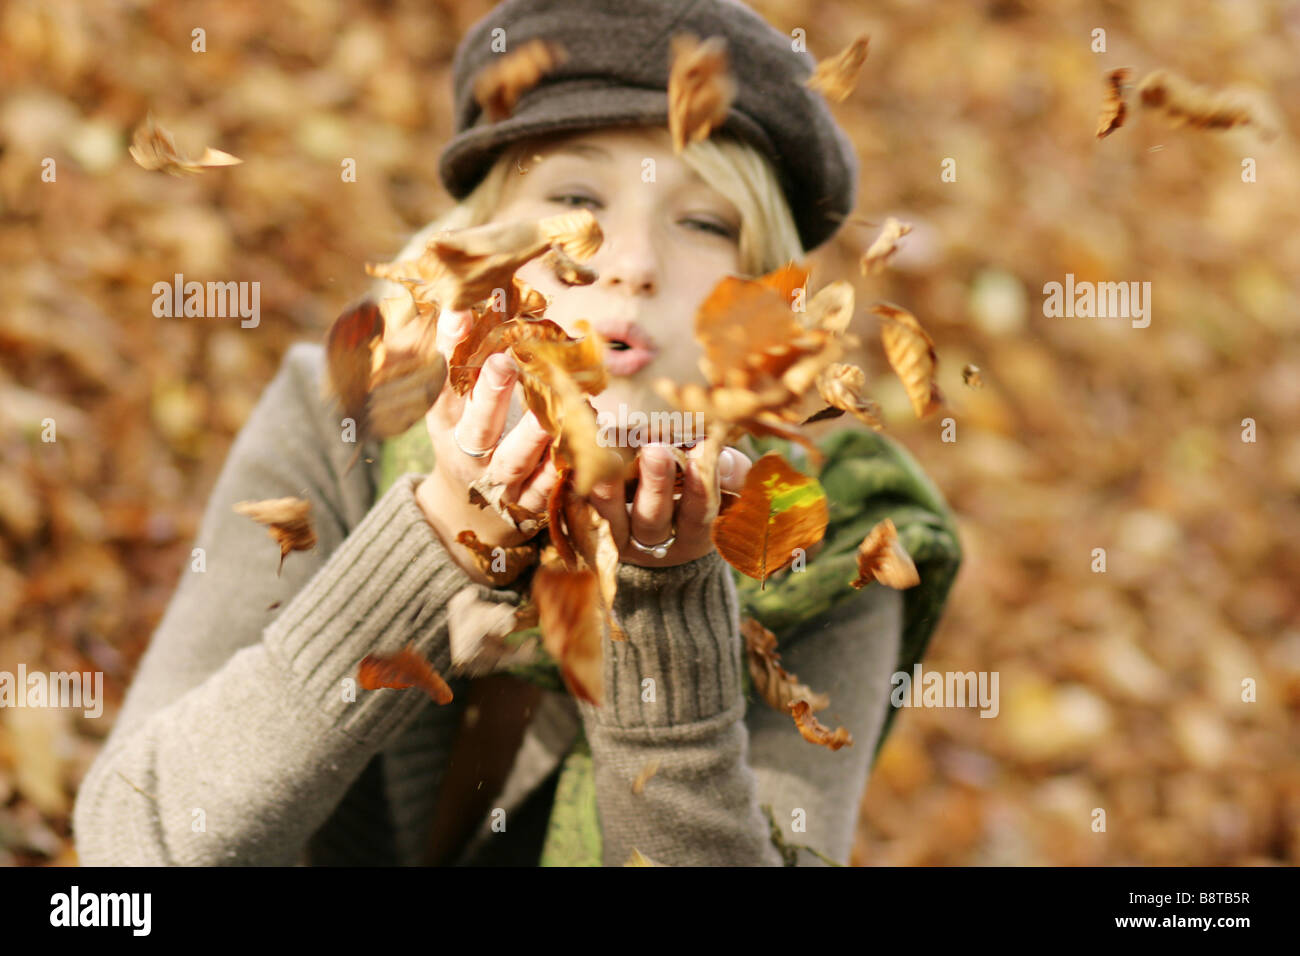 young blond girl with cap and scarf, playing with autumn foliage Stock Photo